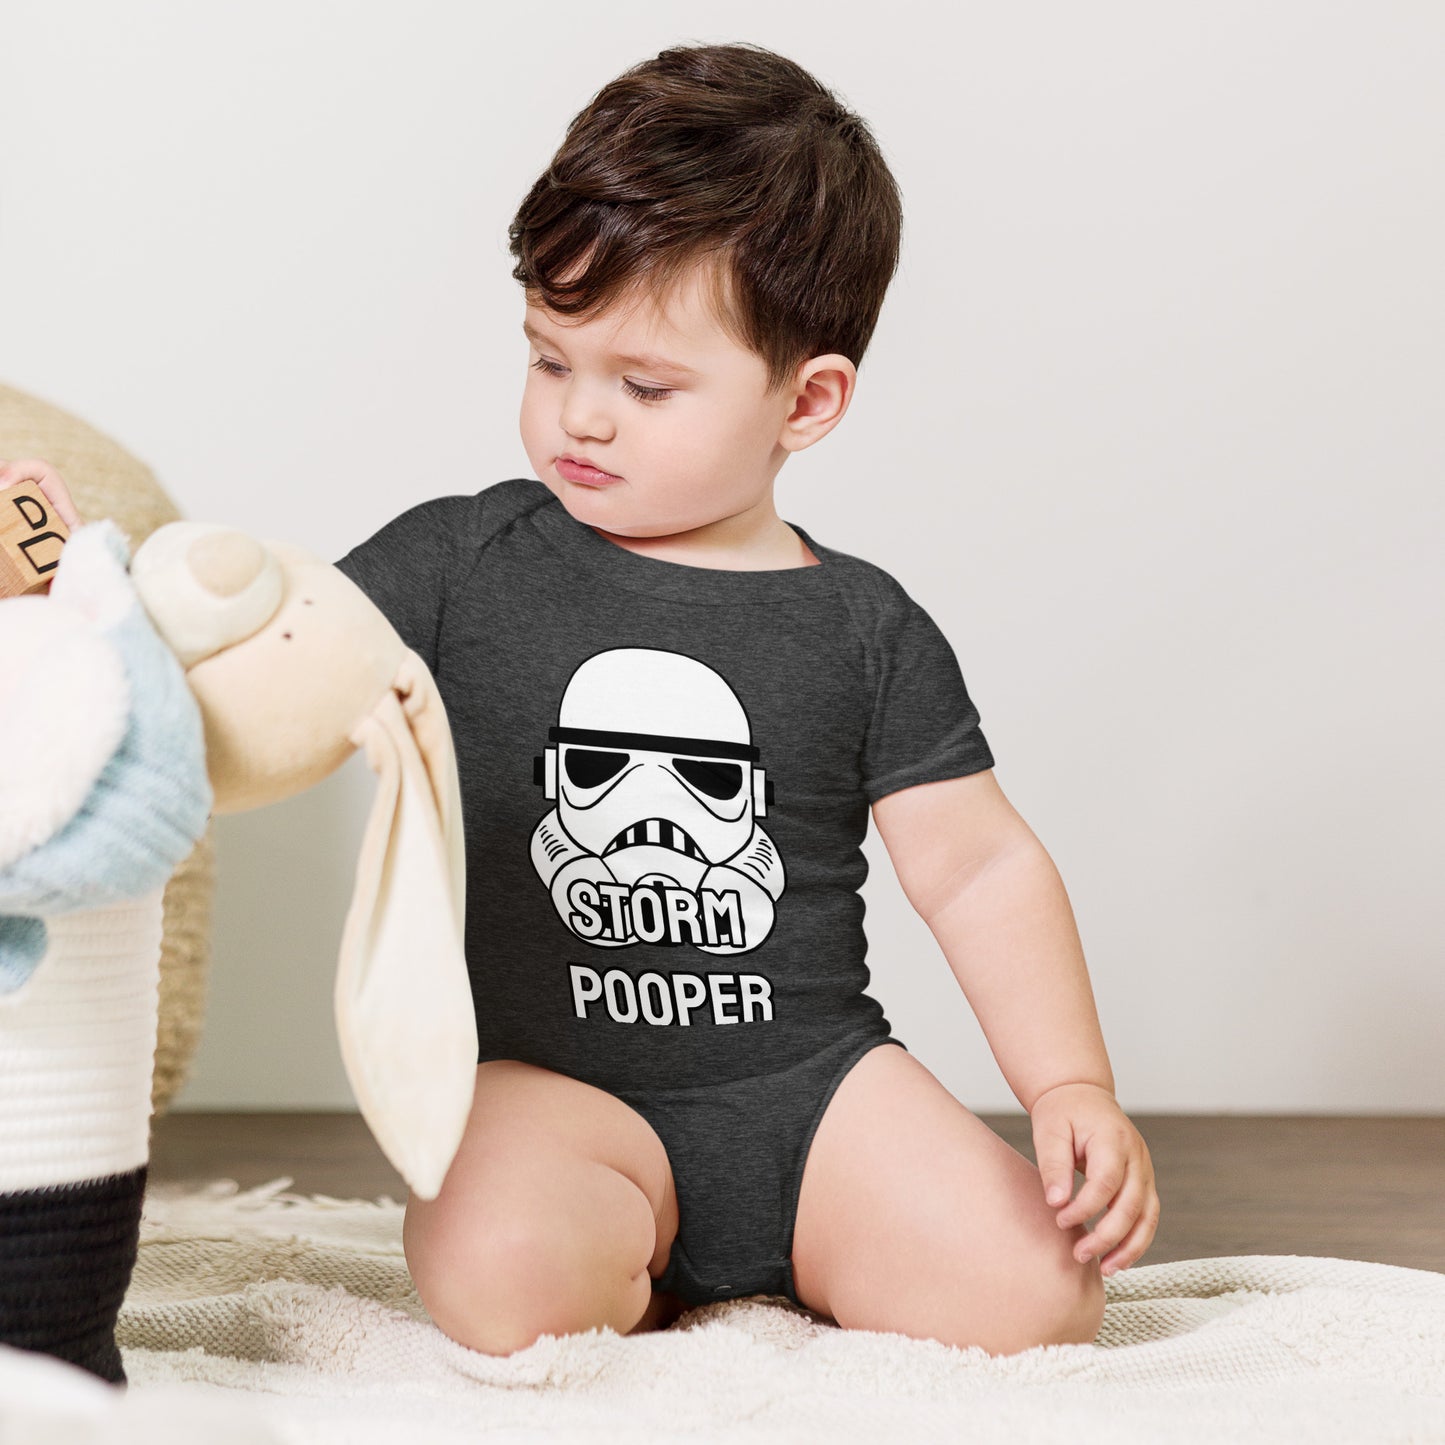 Baby with dark grey short sleeve one piece with picture of a Storm trooper with the text "StORM POOPER"